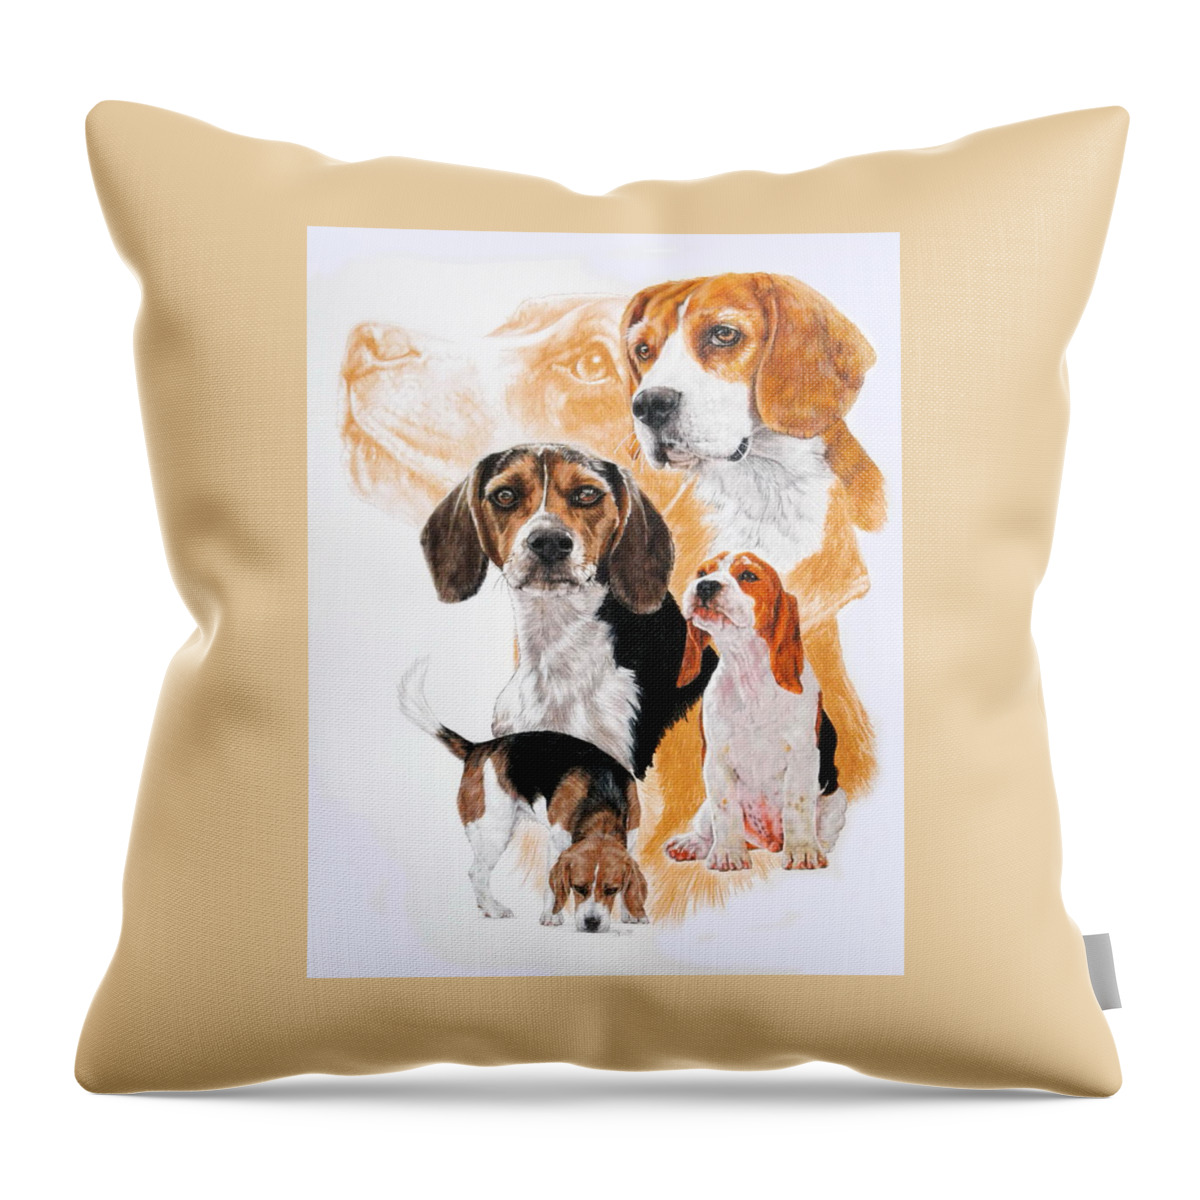 Hound Throw Pillow featuring the mixed media Beagle Medley by Barbara Keith